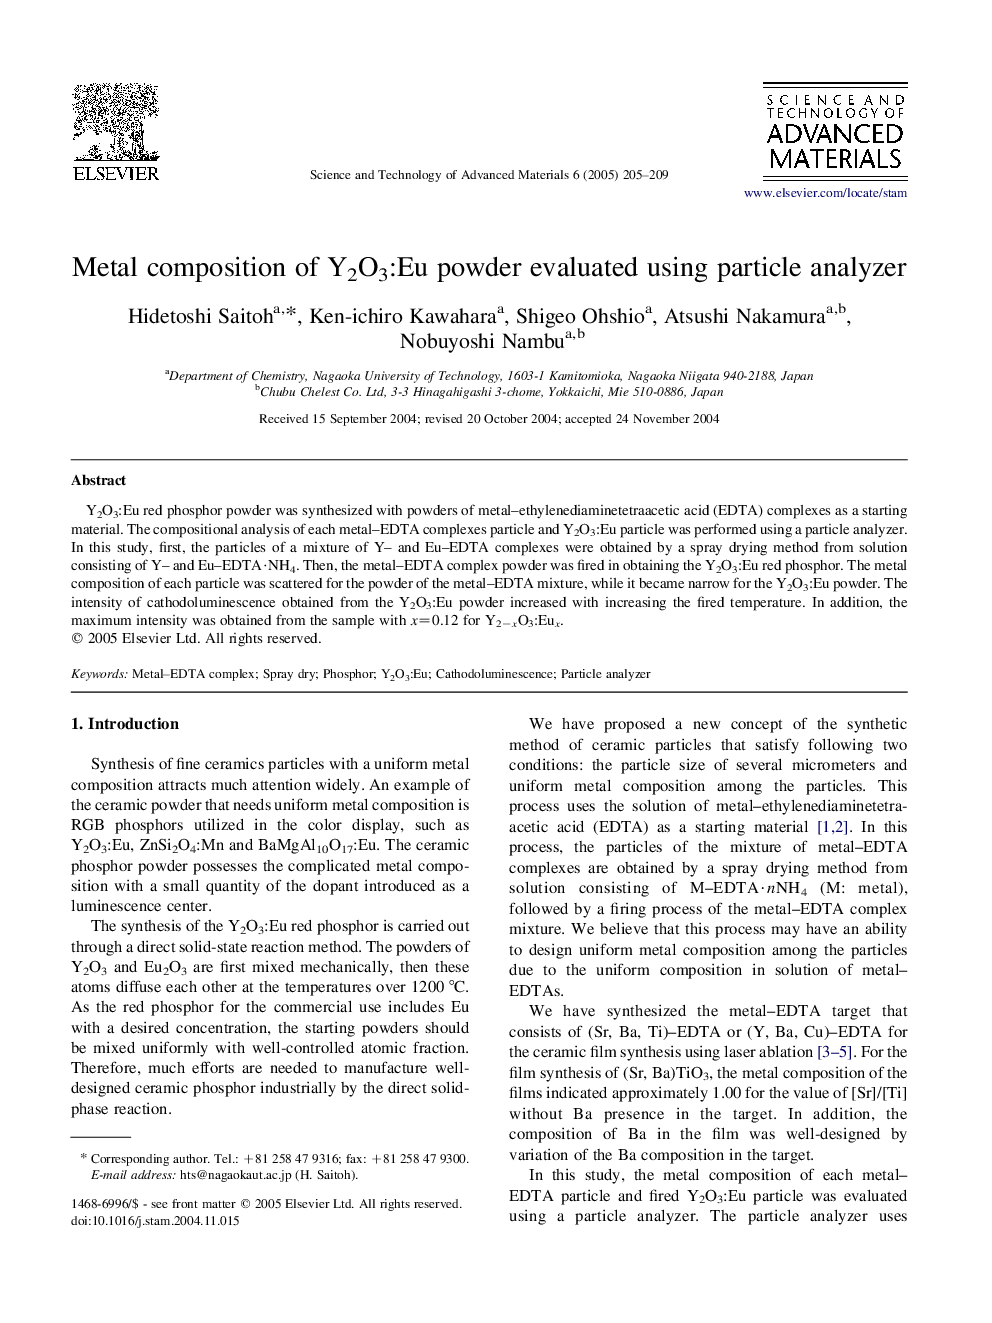 Metal composition of Y2O3:Eu powder evaluated using particle analyzer